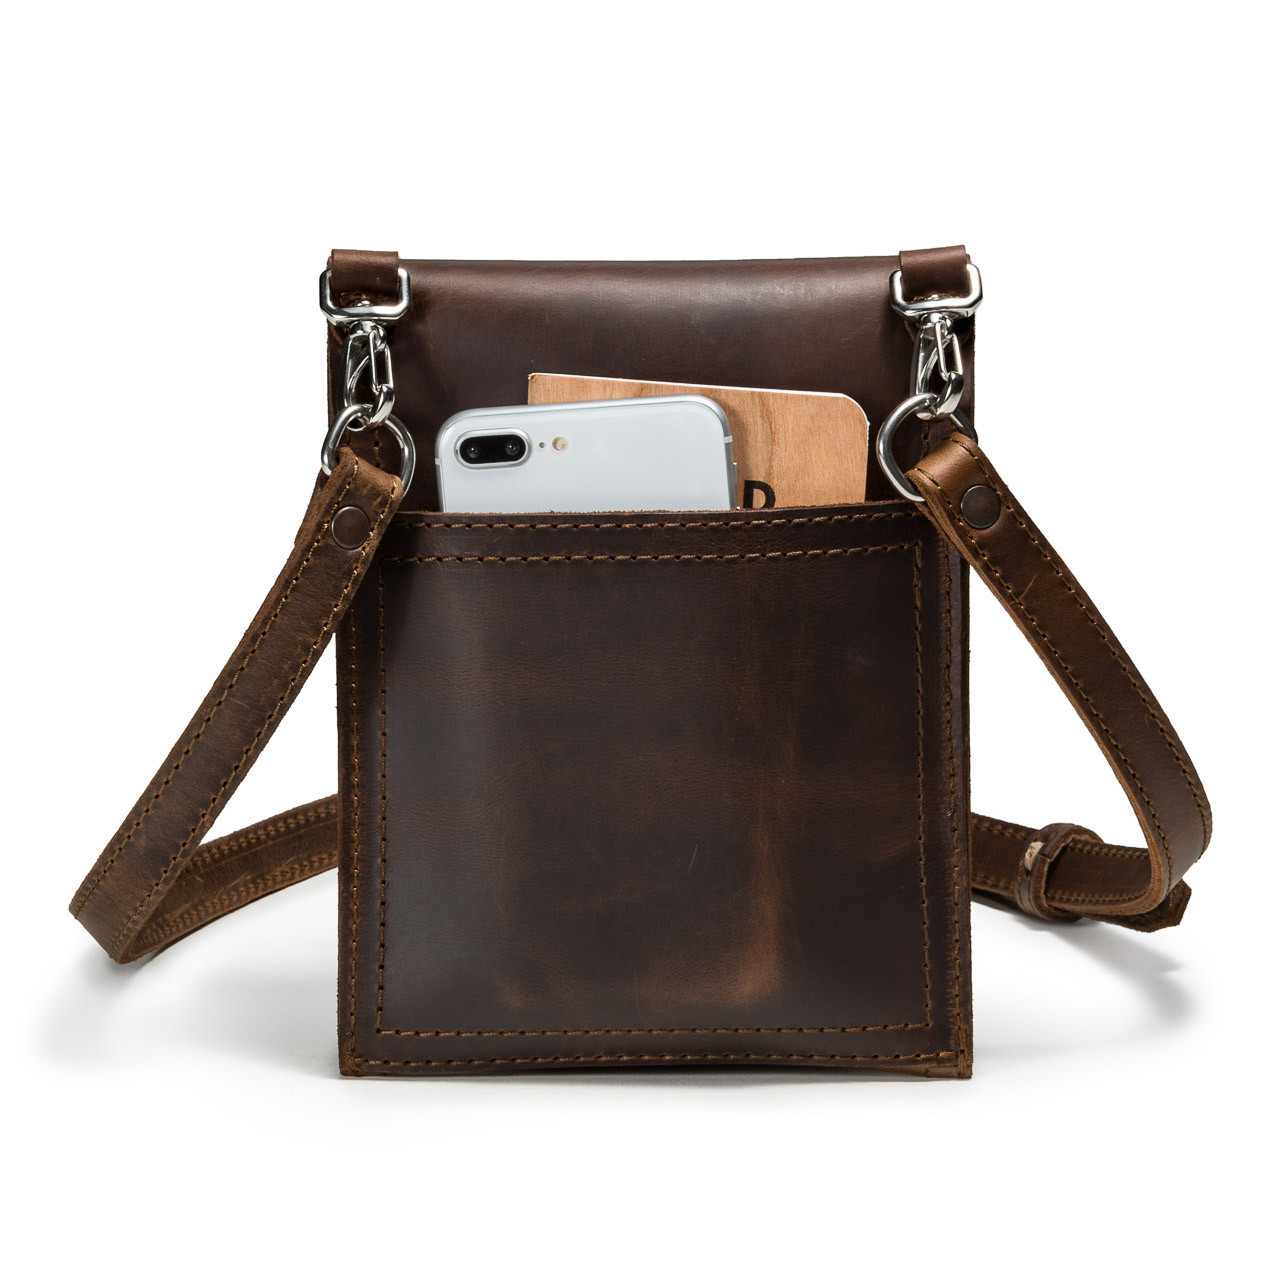 Small Leather Satchel